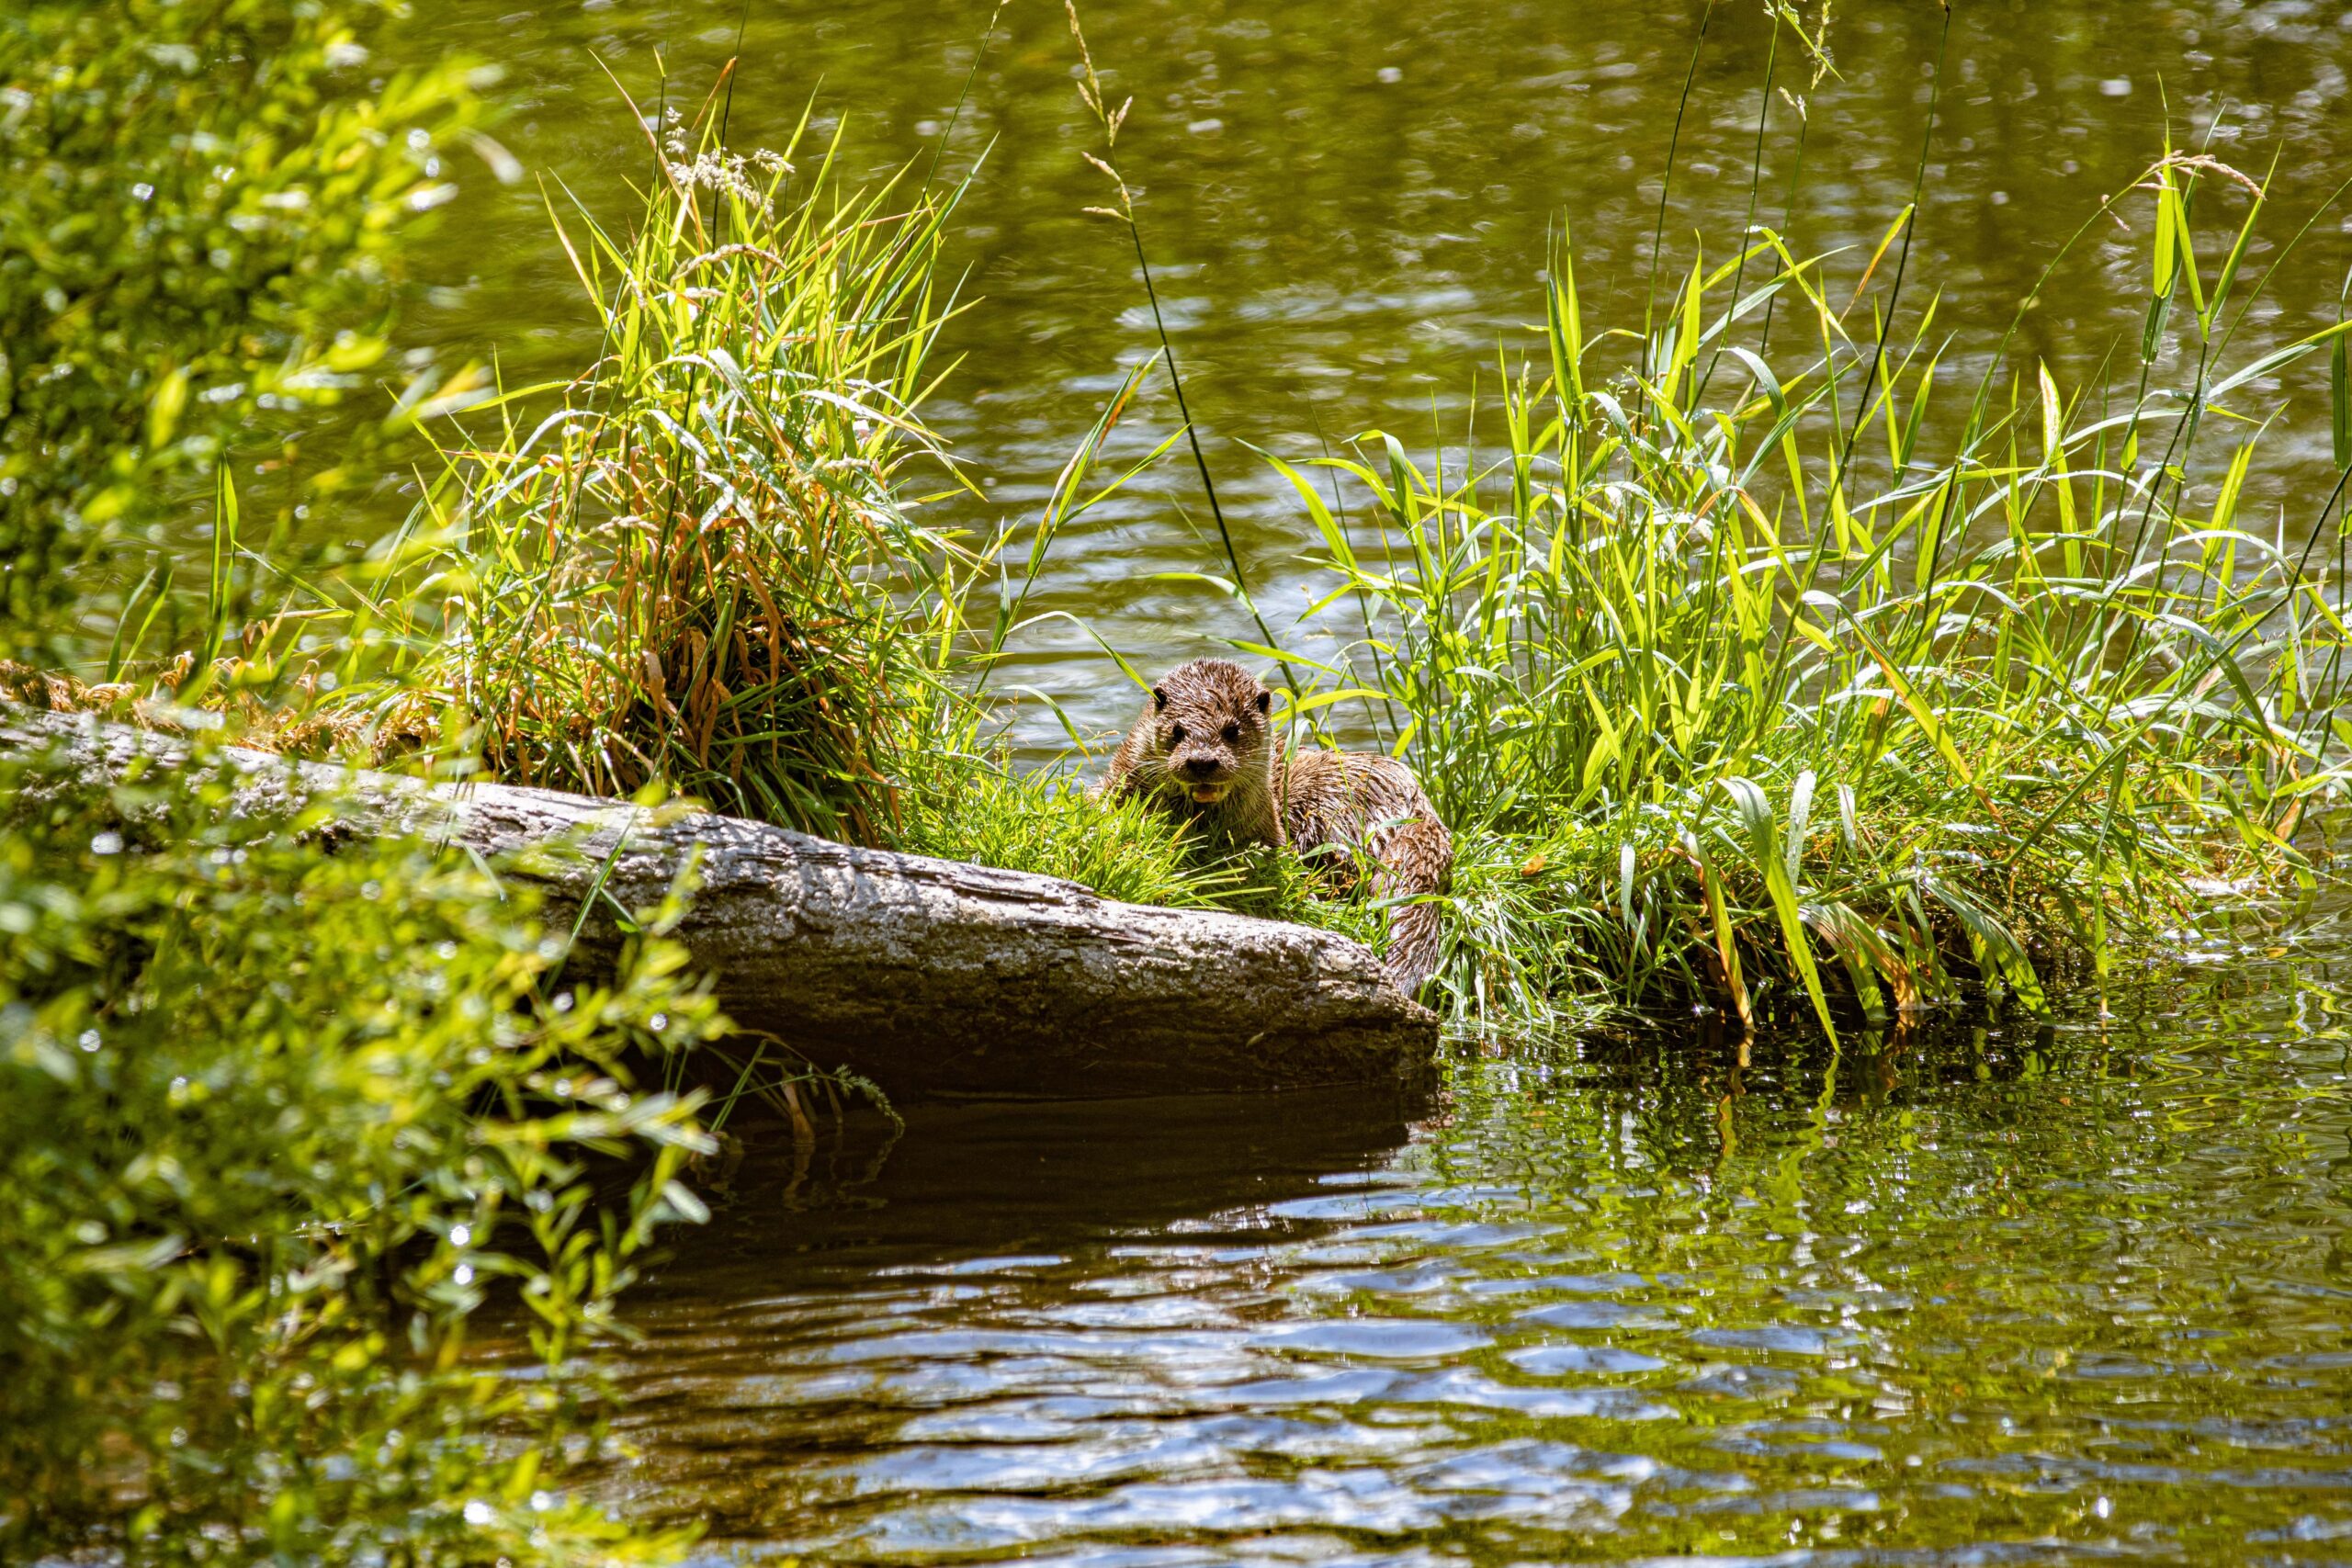 Otter next to a body of water in St. Bernard State Park